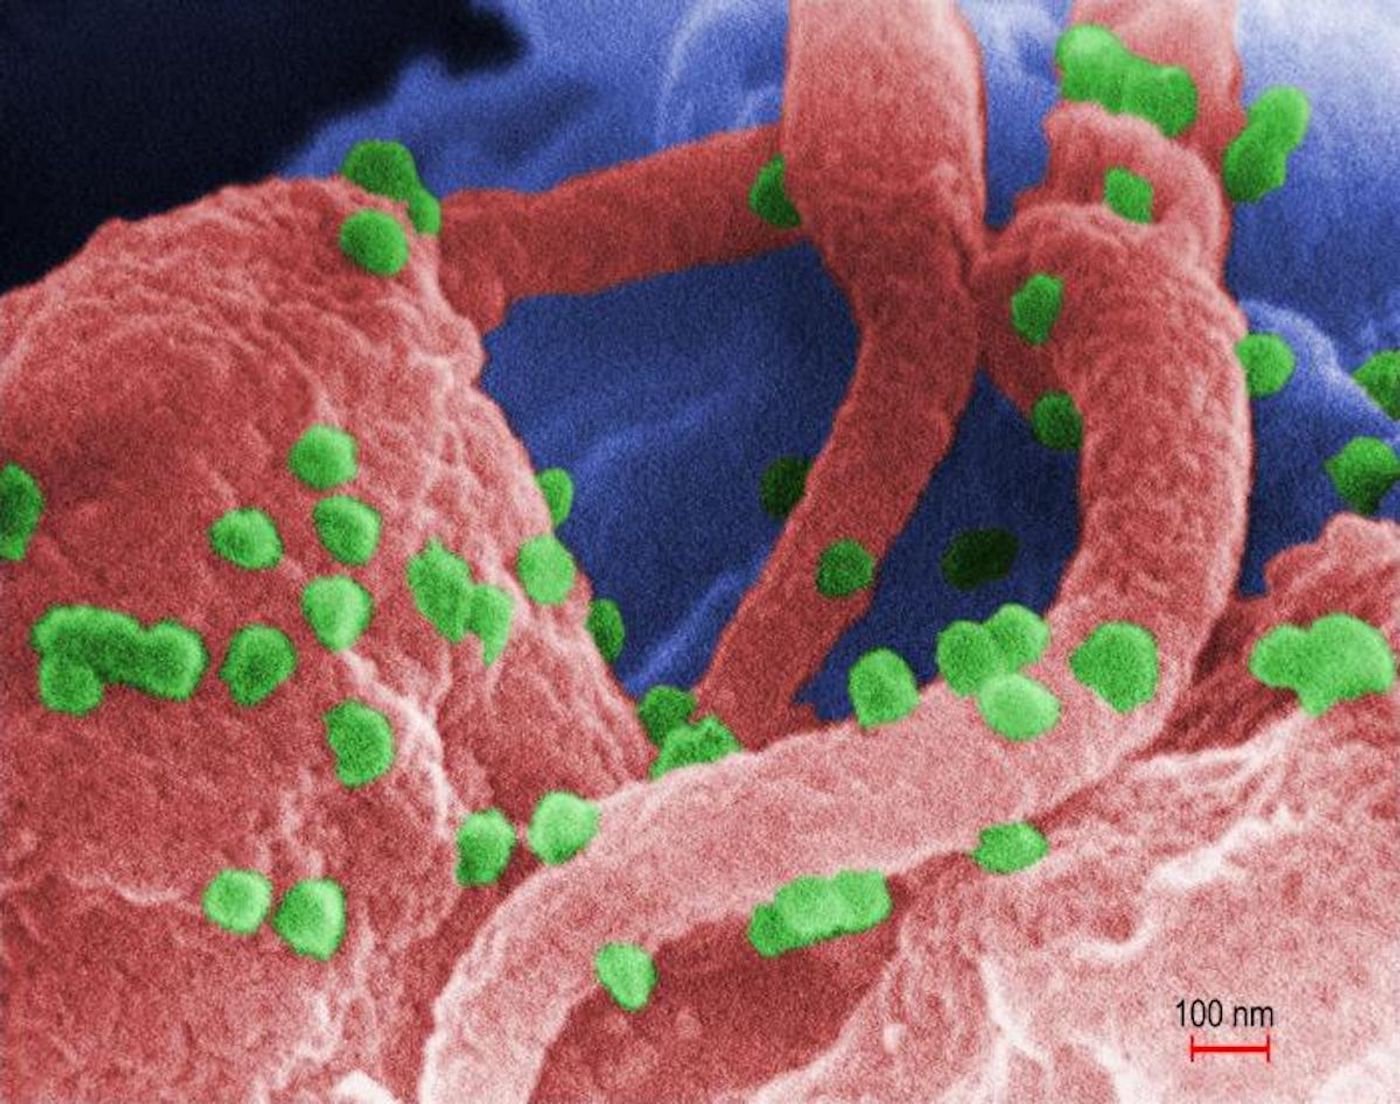 A digitally colorized SEM image of  HIV-1 (green), which had been co-cultivated with human lymphocytes. / Credit: CDC/ C. Goldsmith, P. Feorino, E. L. Palmer, W. R. McManus